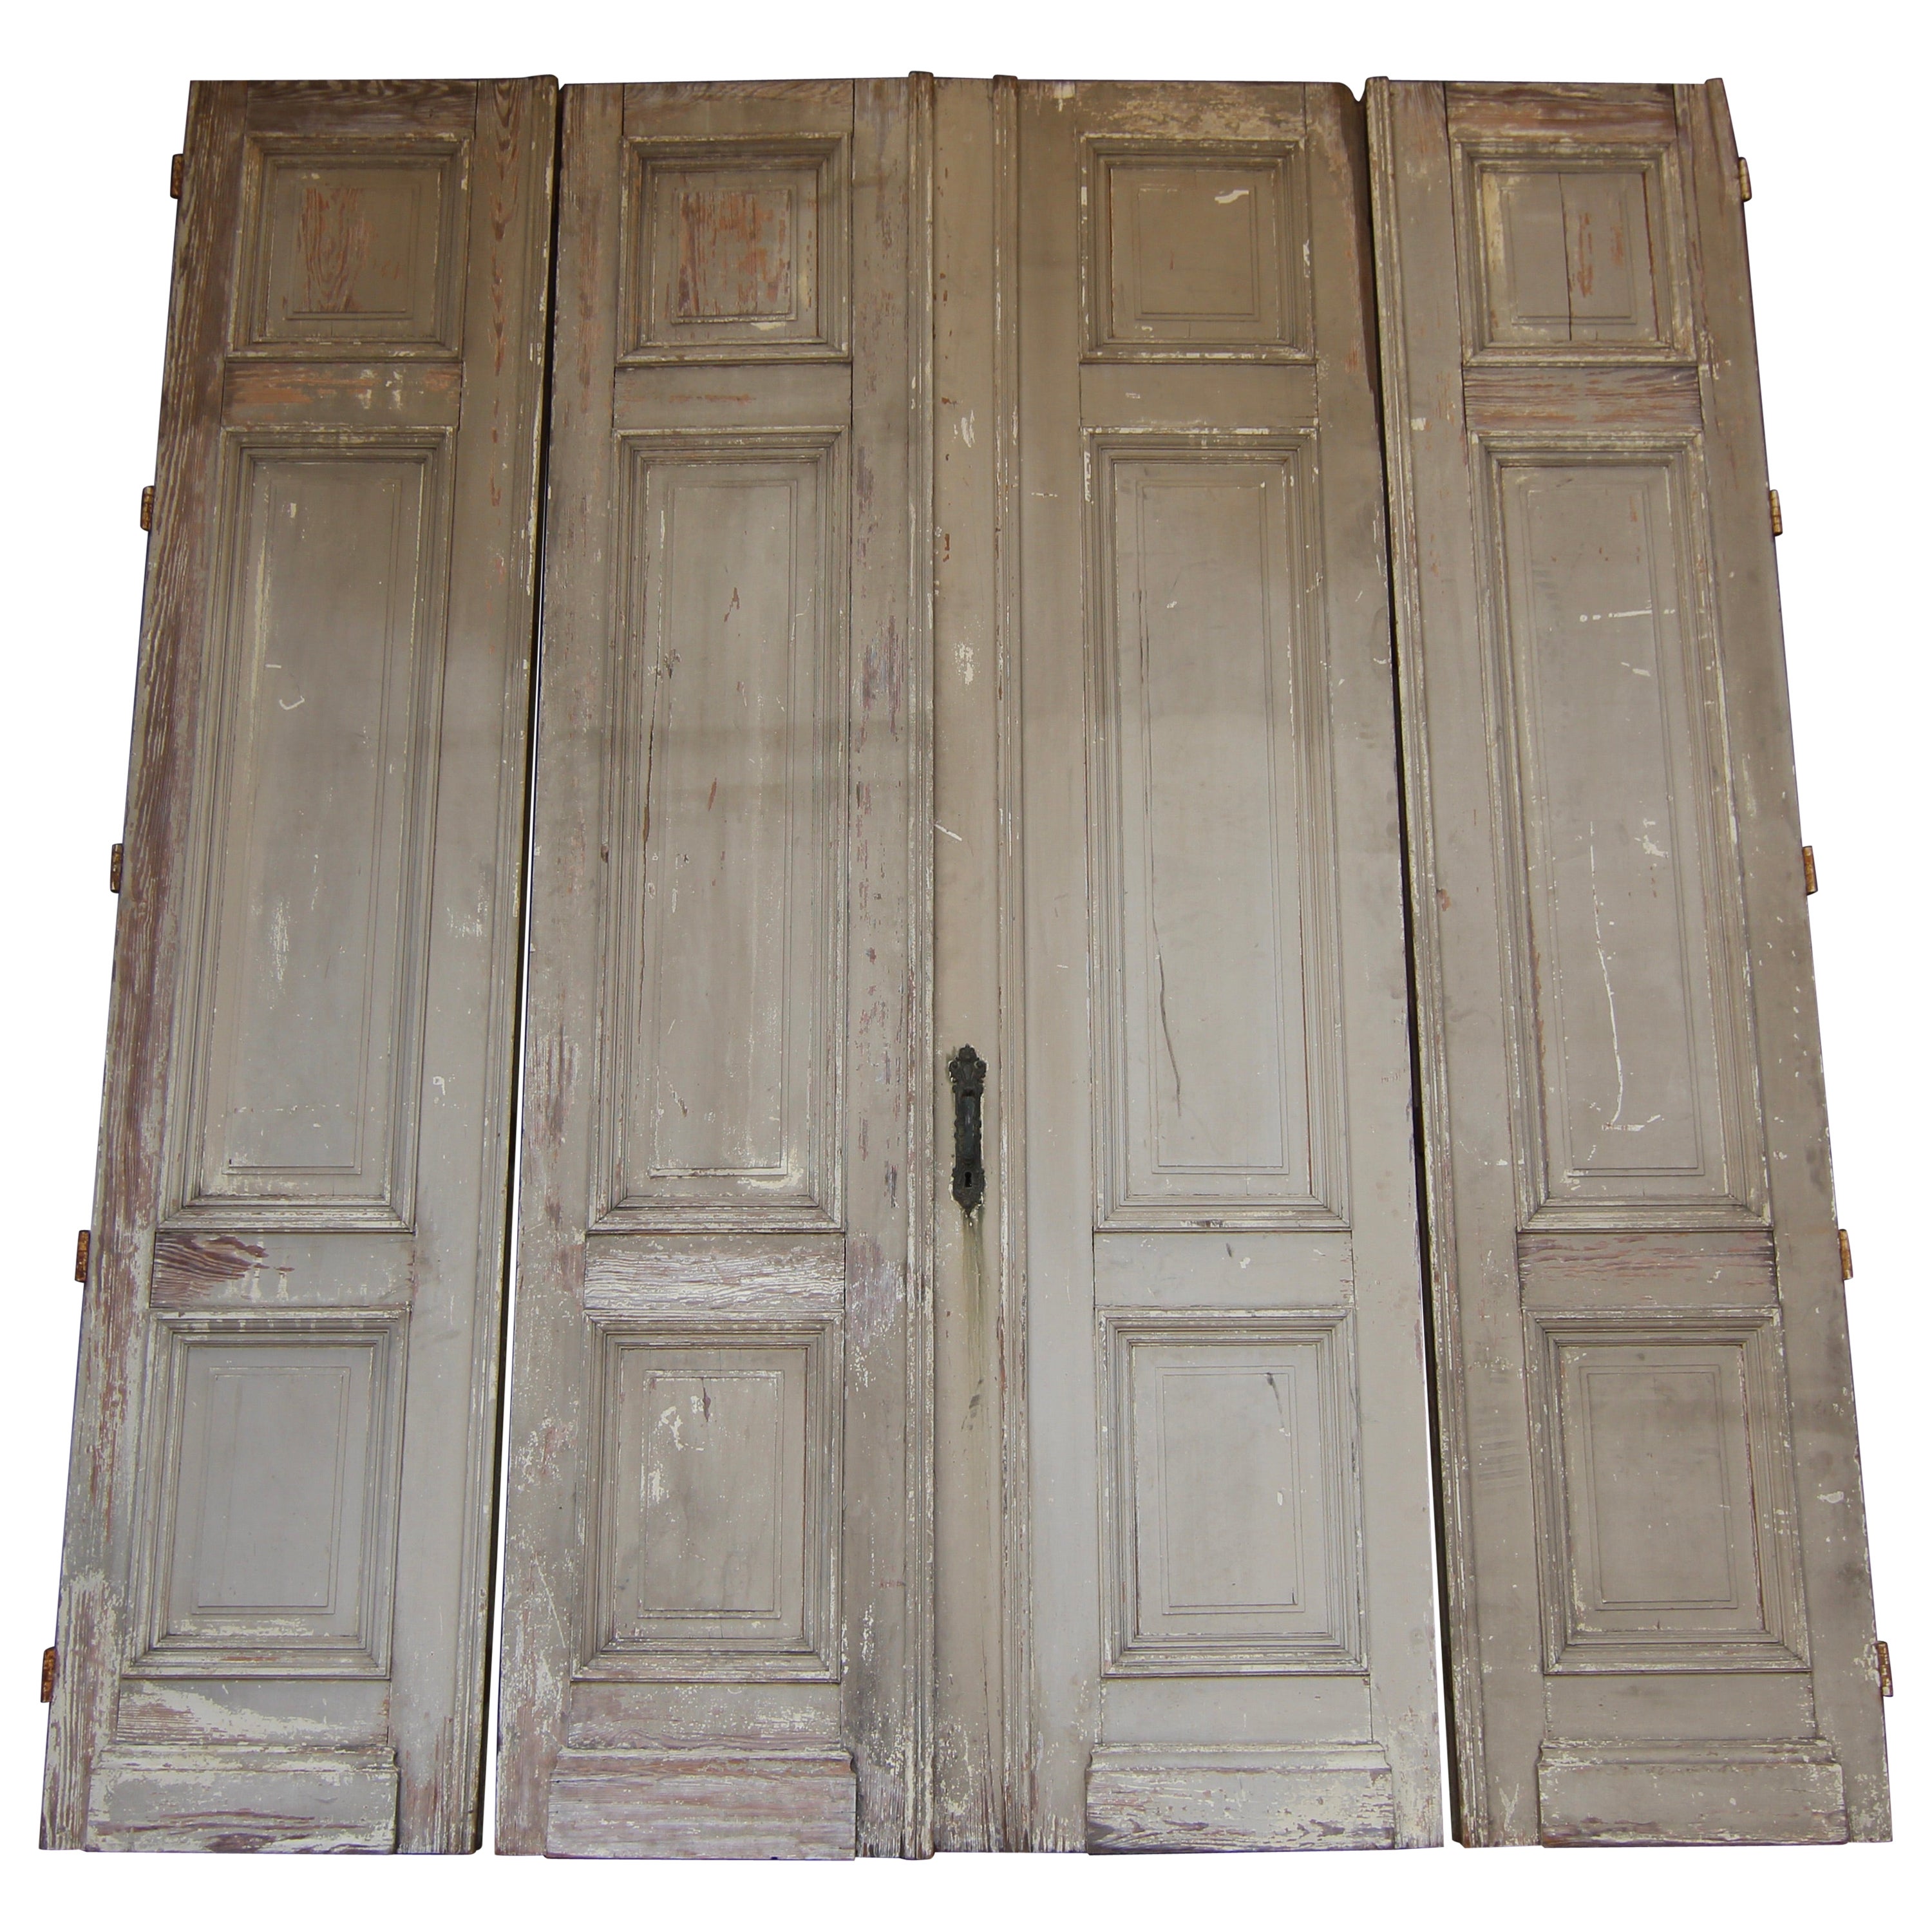 Early 20th Century Double Door consisting of 4 Doors For Sale